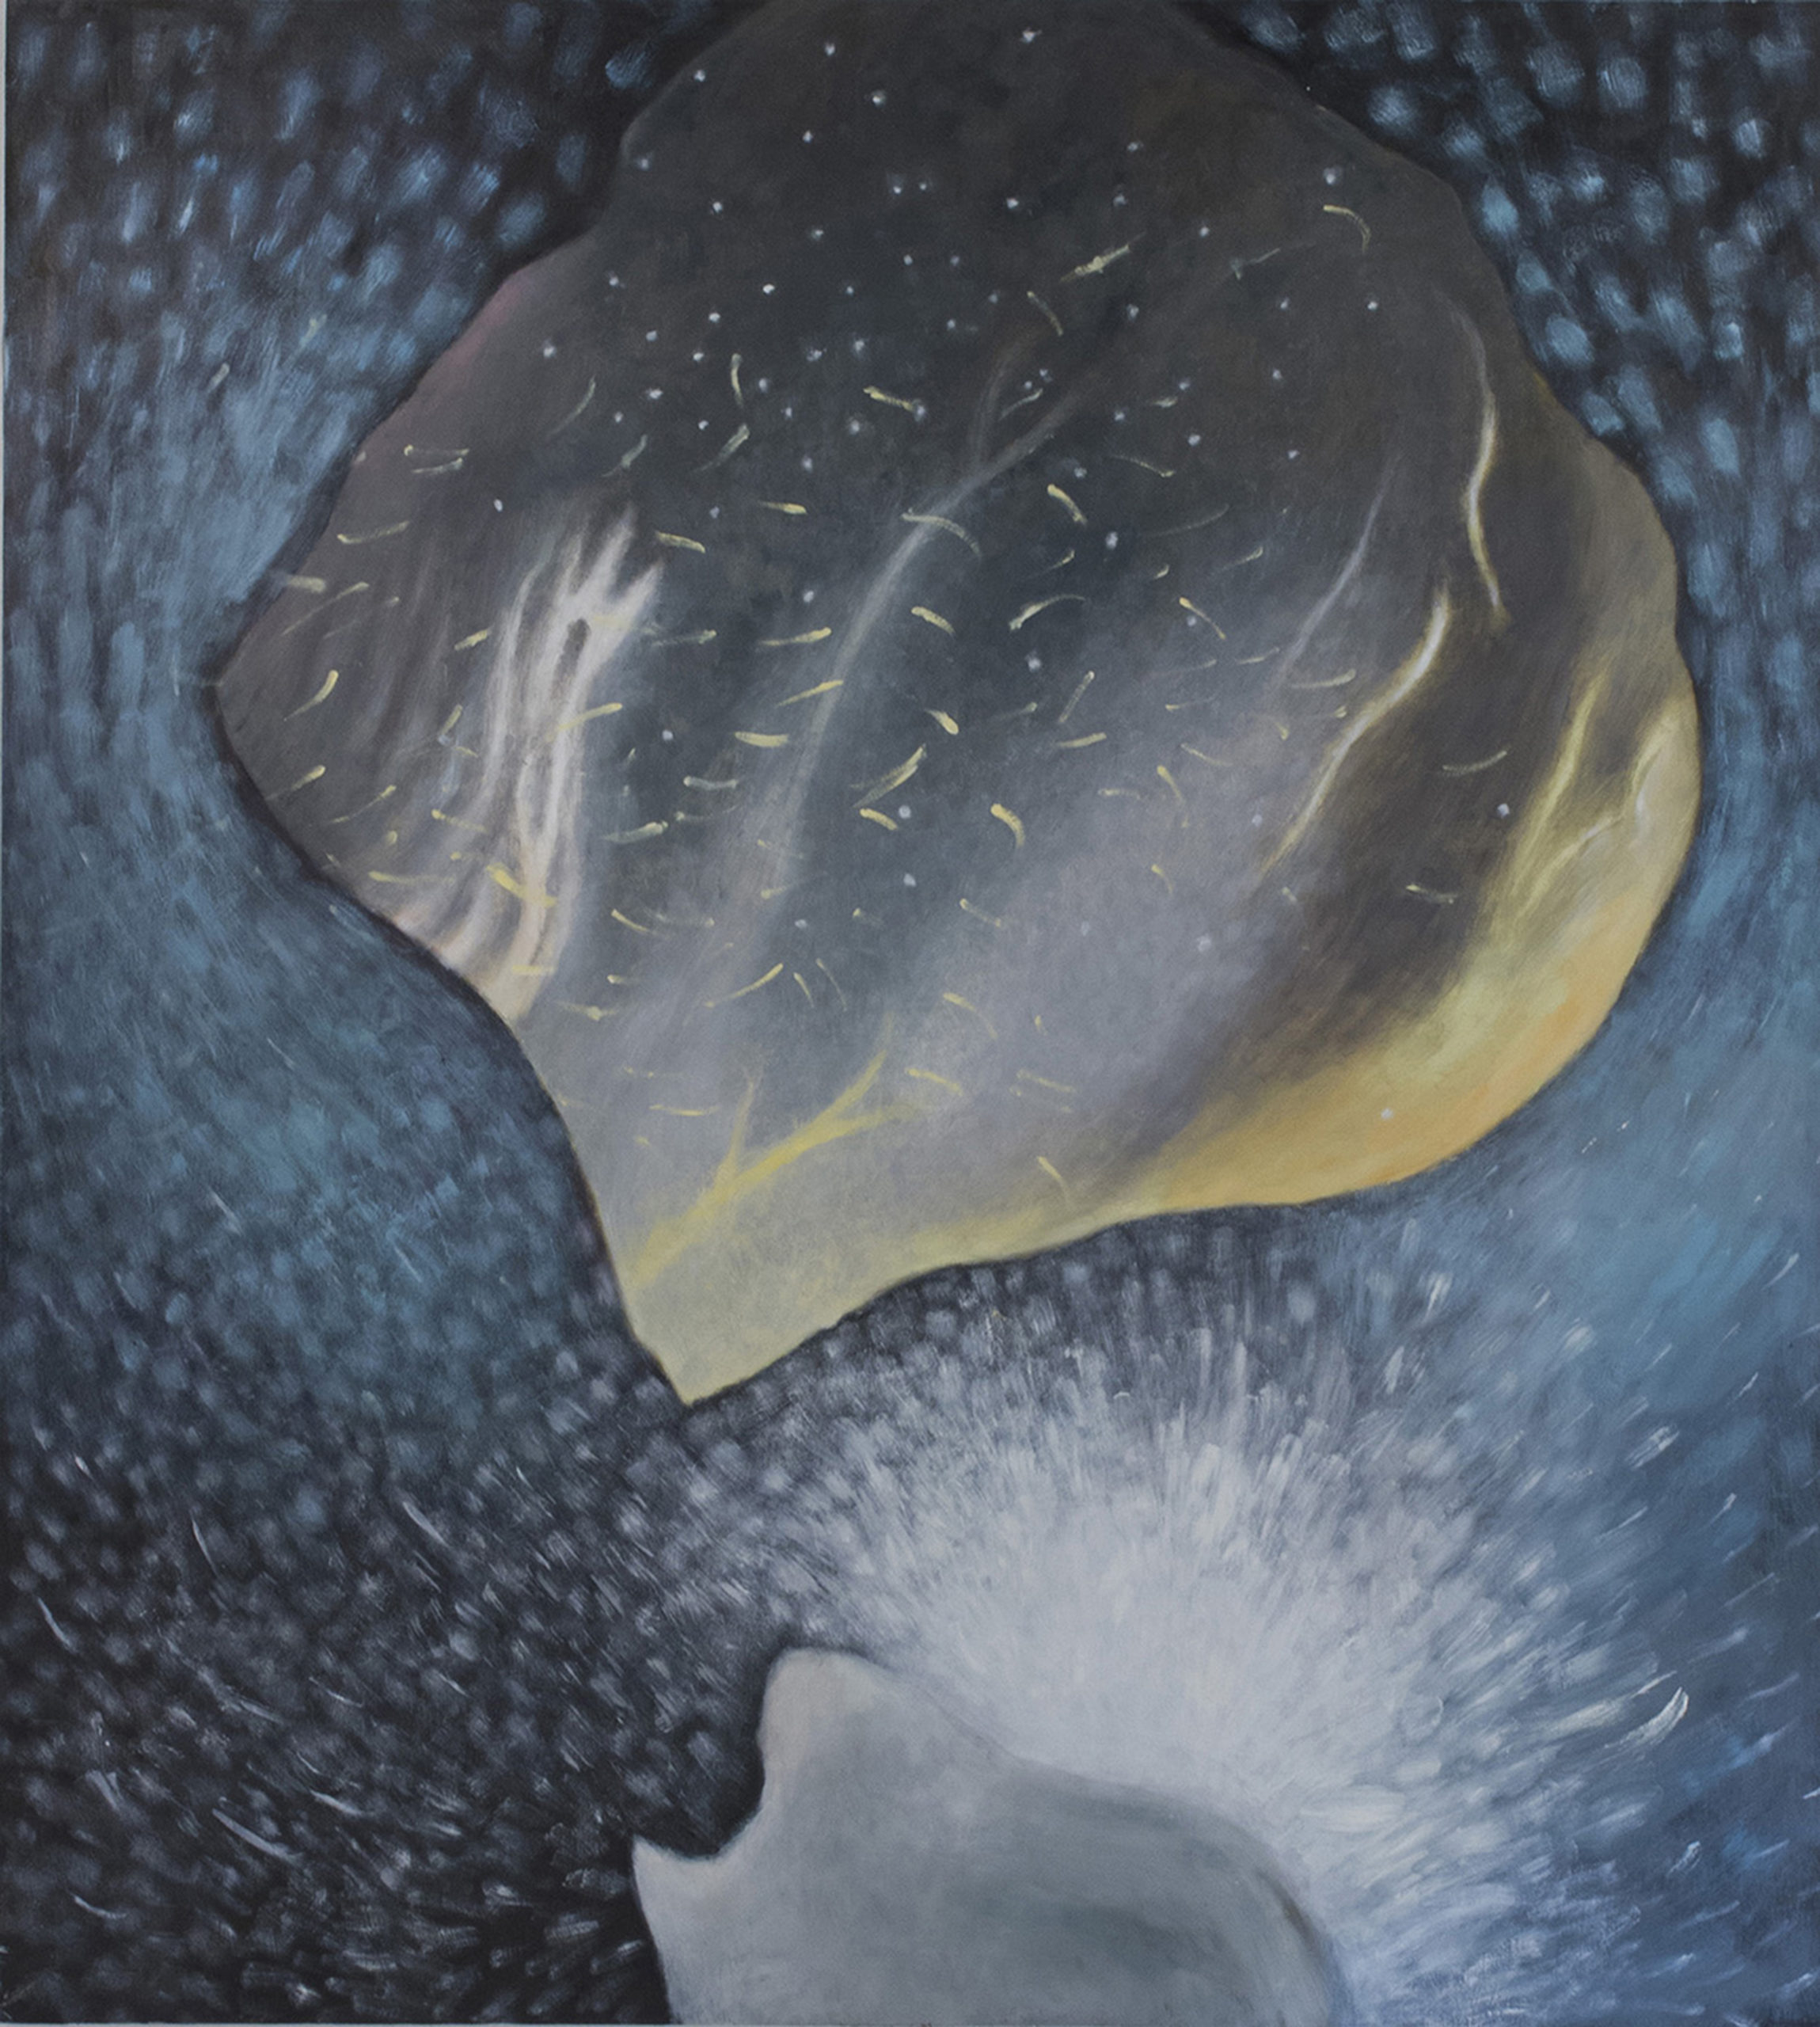 
		                					Shirley Crow		                																	
																											<i>Cool Mystery,</i>  
																																								2006, 
																																								oil on panel, 
																																								42 x 38 x 2 1/2 inches 
																								
		                				